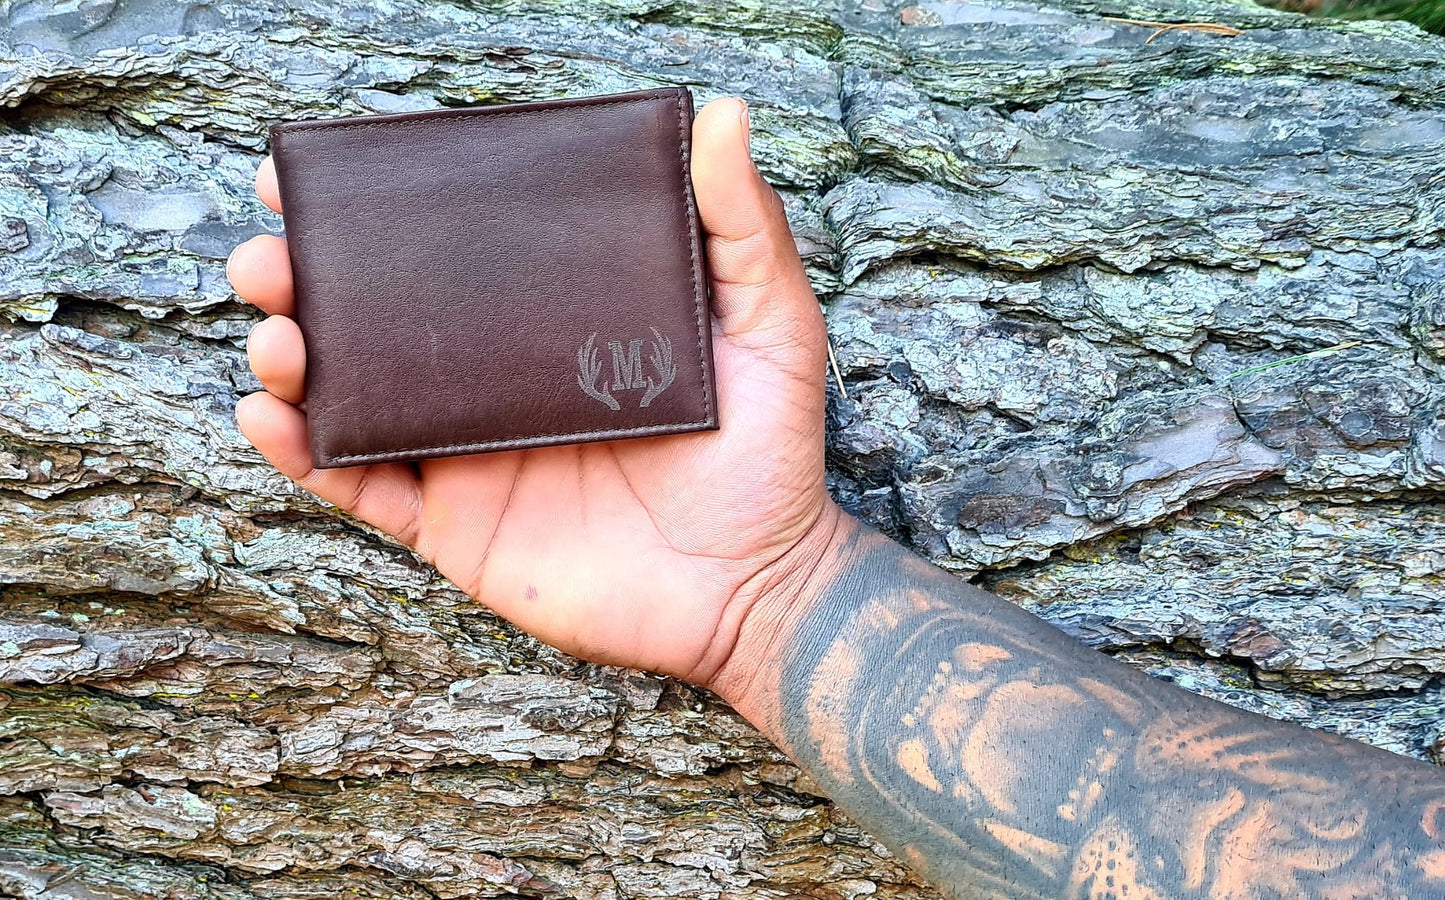 Initials engraved on wallet